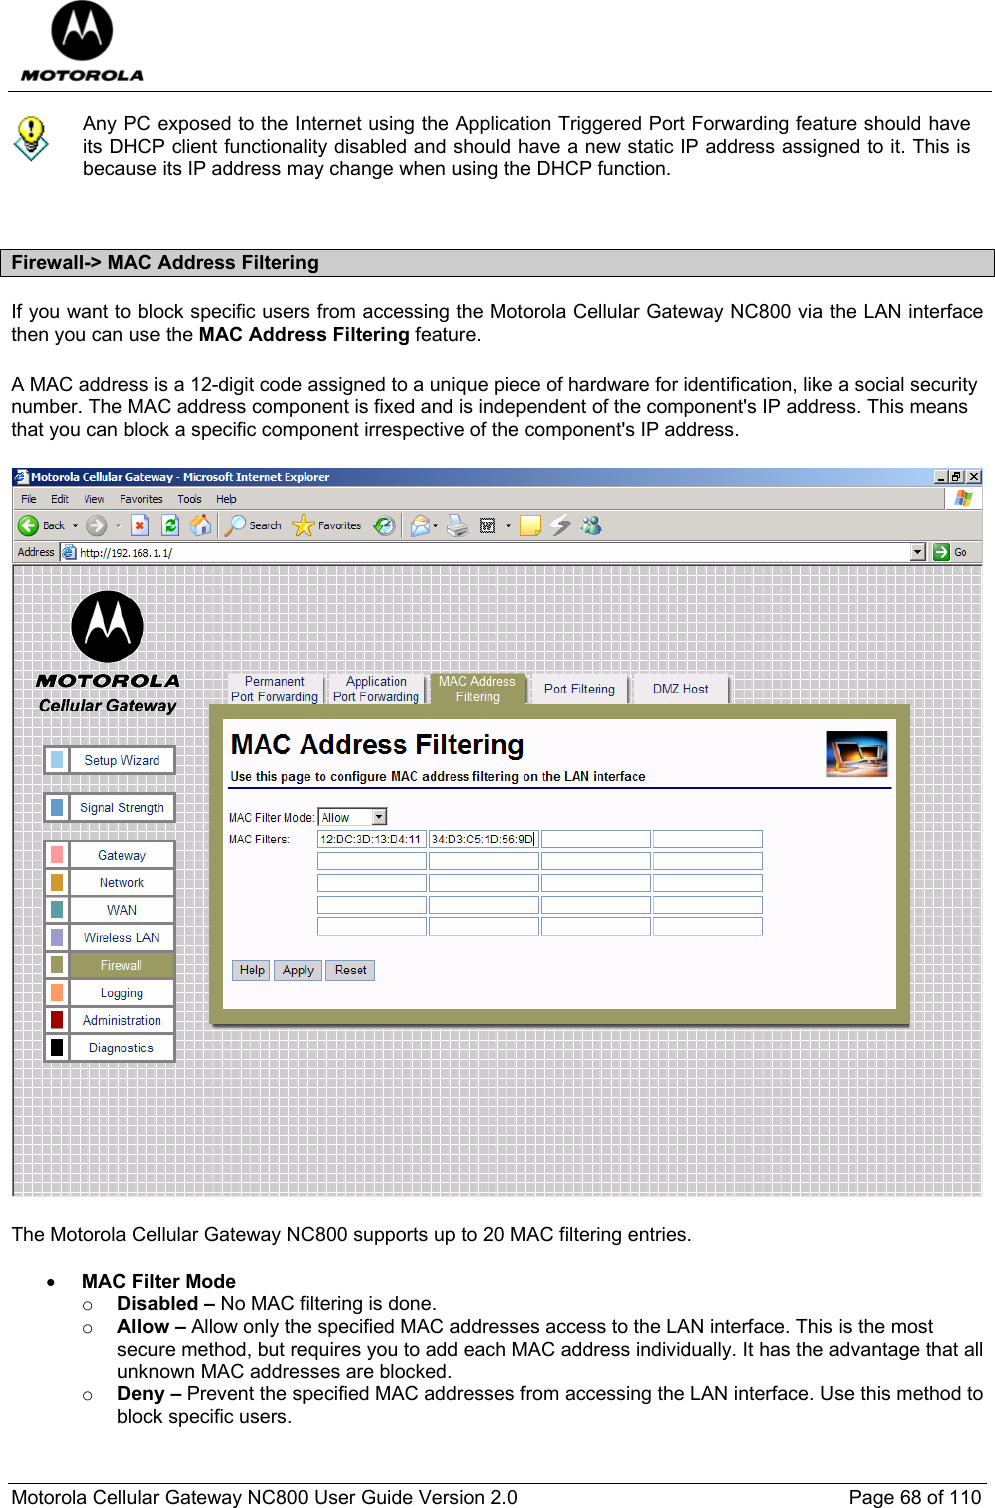  Motorola Cellular Gateway NC800 User Guide Version 2.0     Page 68 of 110   Any PC exposed to the Internet using the Application Triggered Port Forwarding feature should have its DHCP client functionality disabled and should have a new static IP address assigned to it. This is because its IP address may change when using the DHCP function.   Firewall-&gt; MAC Address Filtering If you want to block specific users from accessing the Motorola Cellular Gateway NC800 via the LAN interface then you can use the MAC Address Filtering feature. A MAC address is a 12-digit code assigned to a unique piece of hardware for identification, like a social security number. The MAC address component is fixed and is independent of the component&apos;s IP address. This means that you can block a specific component irrespective of the component&apos;s IP address.  The Motorola Cellular Gateway NC800 supports up to 20 MAC filtering entries.  • MAC Filter Mode o Disabled – No MAC filtering is done. o Allow – Allow only the specified MAC addresses access to the LAN interface. This is the most secure method, but requires you to add each MAC address individually. It has the advantage that all unknown MAC addresses are blocked. o Deny – Prevent the specified MAC addresses from accessing the LAN interface. Use this method to block specific users. 